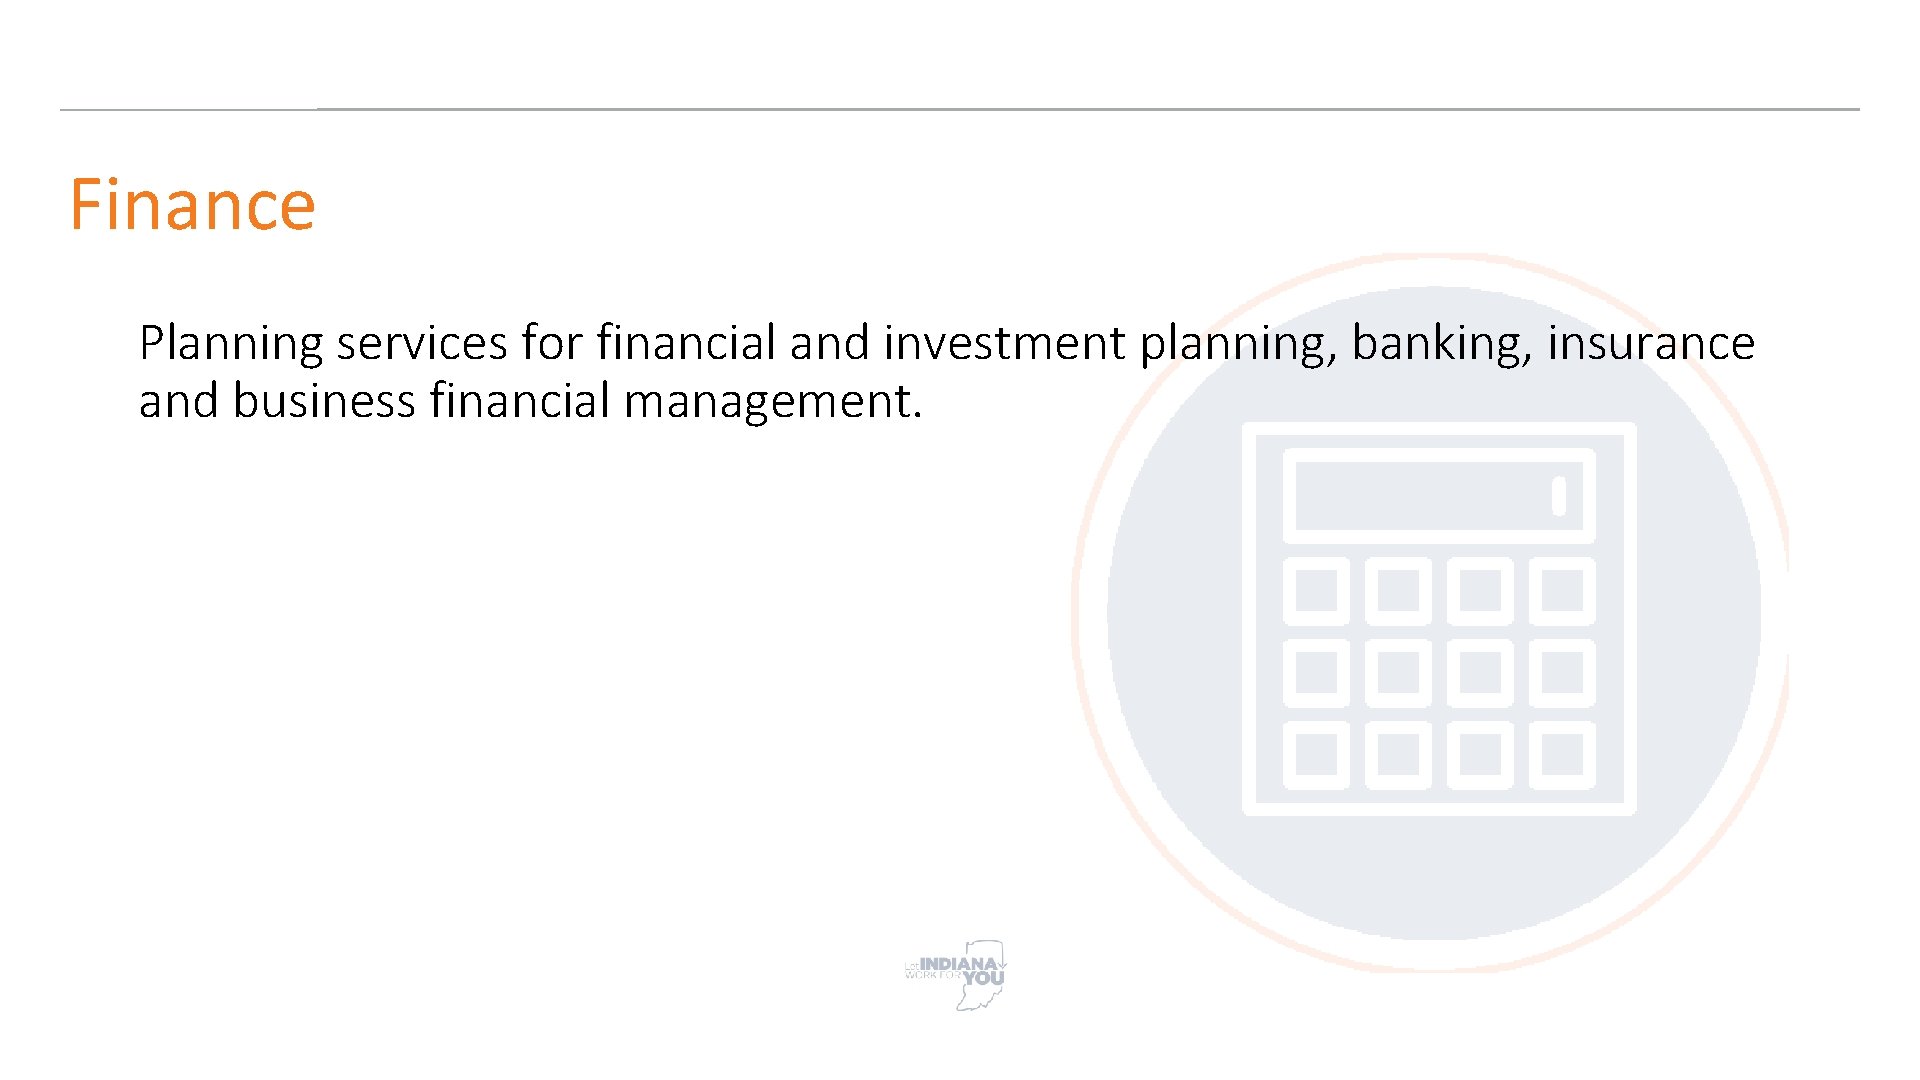 Finance Planning services for financial and investment planning, banking, insurance and business financial management.